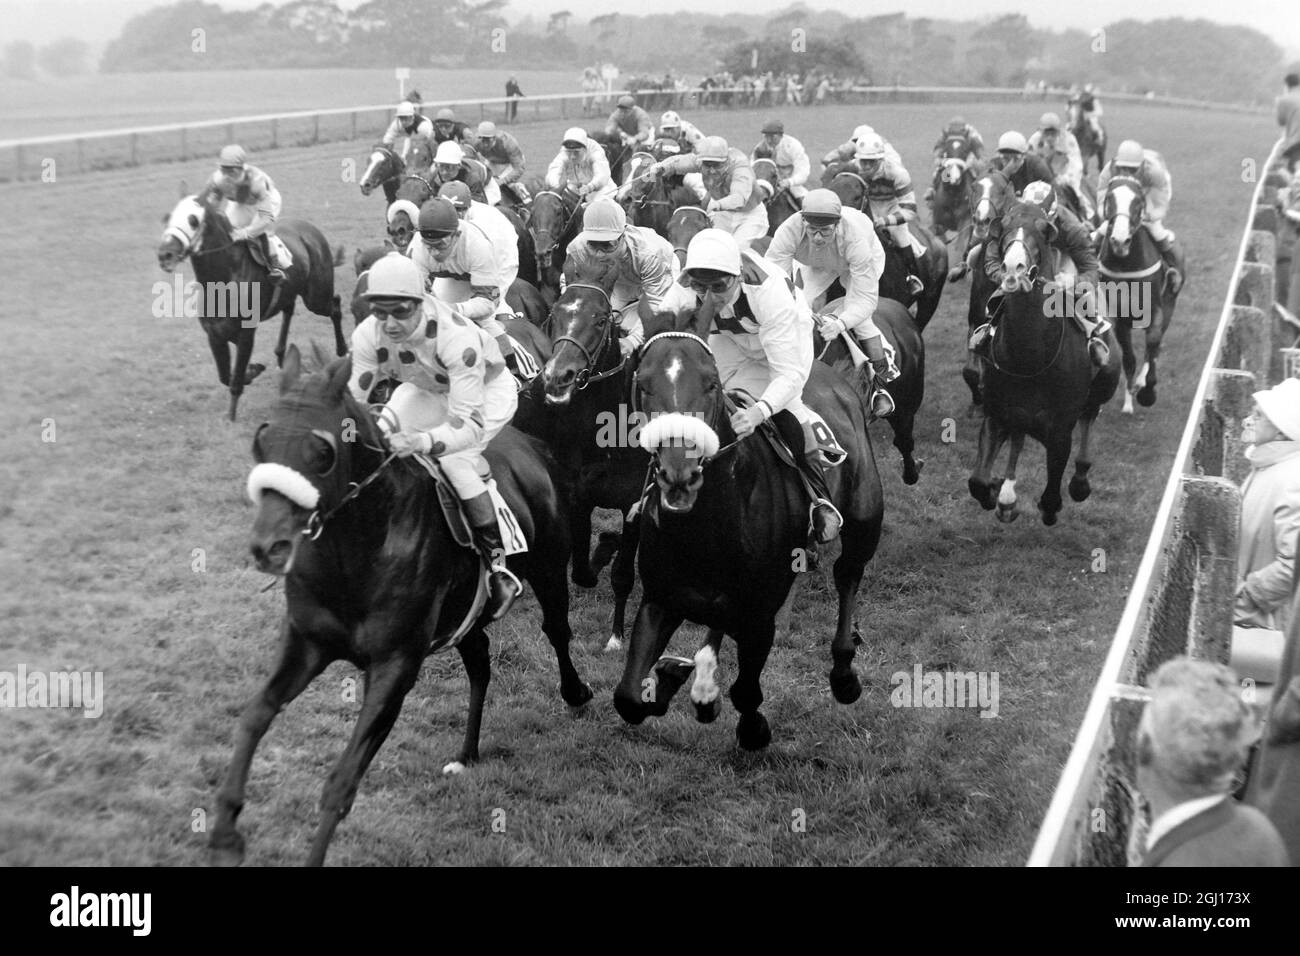 29 MAY 1963 HORSES REACH THE MILE POST IN THE DERBY. RELKO WITH YVES SAINT-MARTIN UP WON THE RACE AND CAN BE SEEN IN THE CENTRE OF THE PICTURE BETWEEN AND BEHIND THE TWO HORSES WITH THE NOSEBANDS. EPSOM, SURREY, ENGLAND. Stock Photo